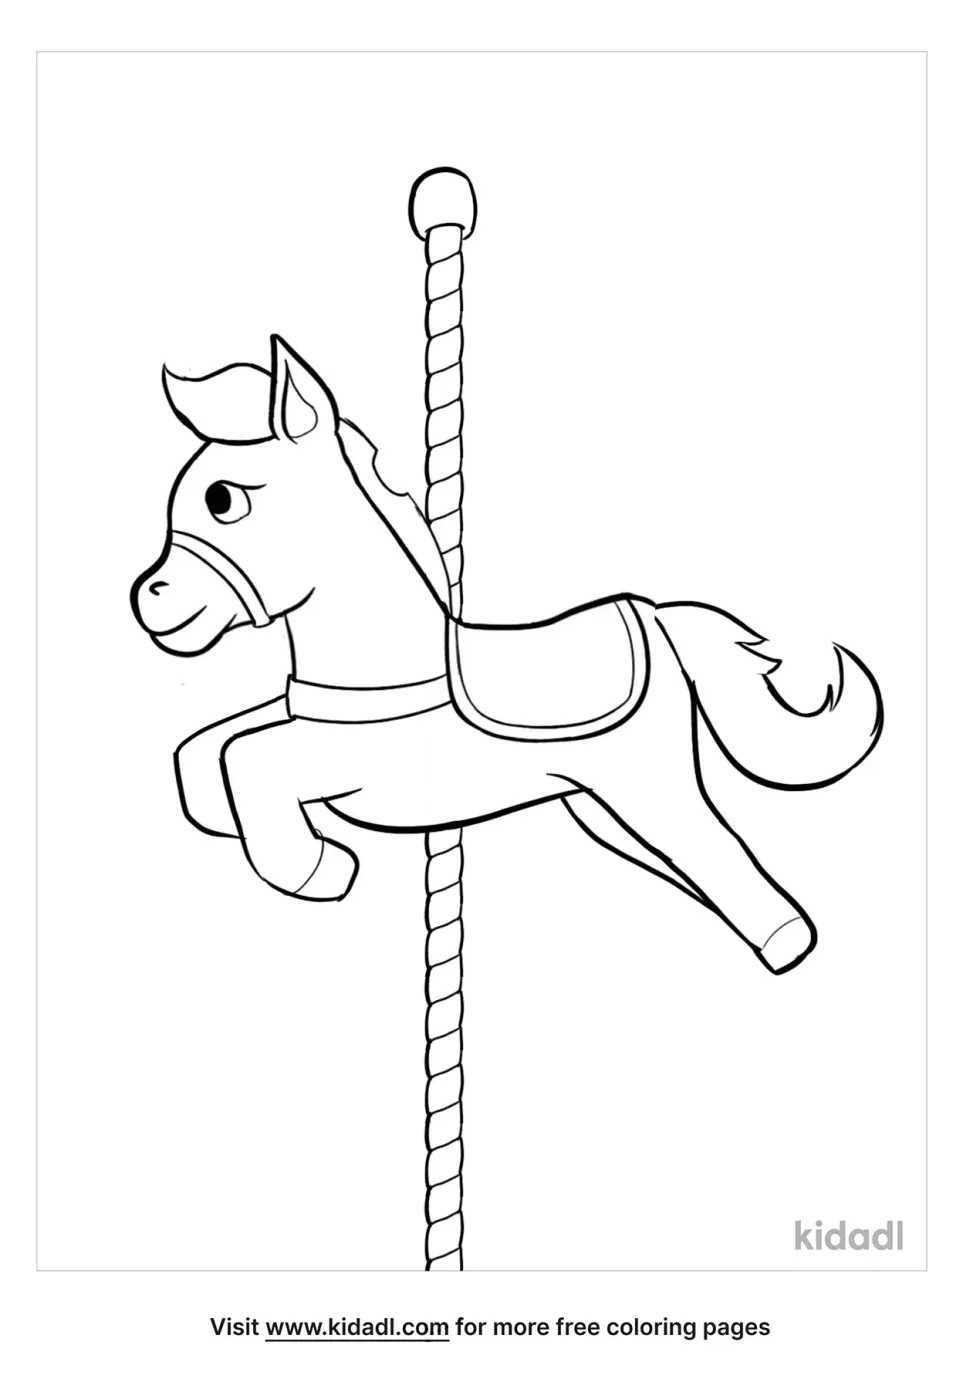 Carousel Pole Coloring Page